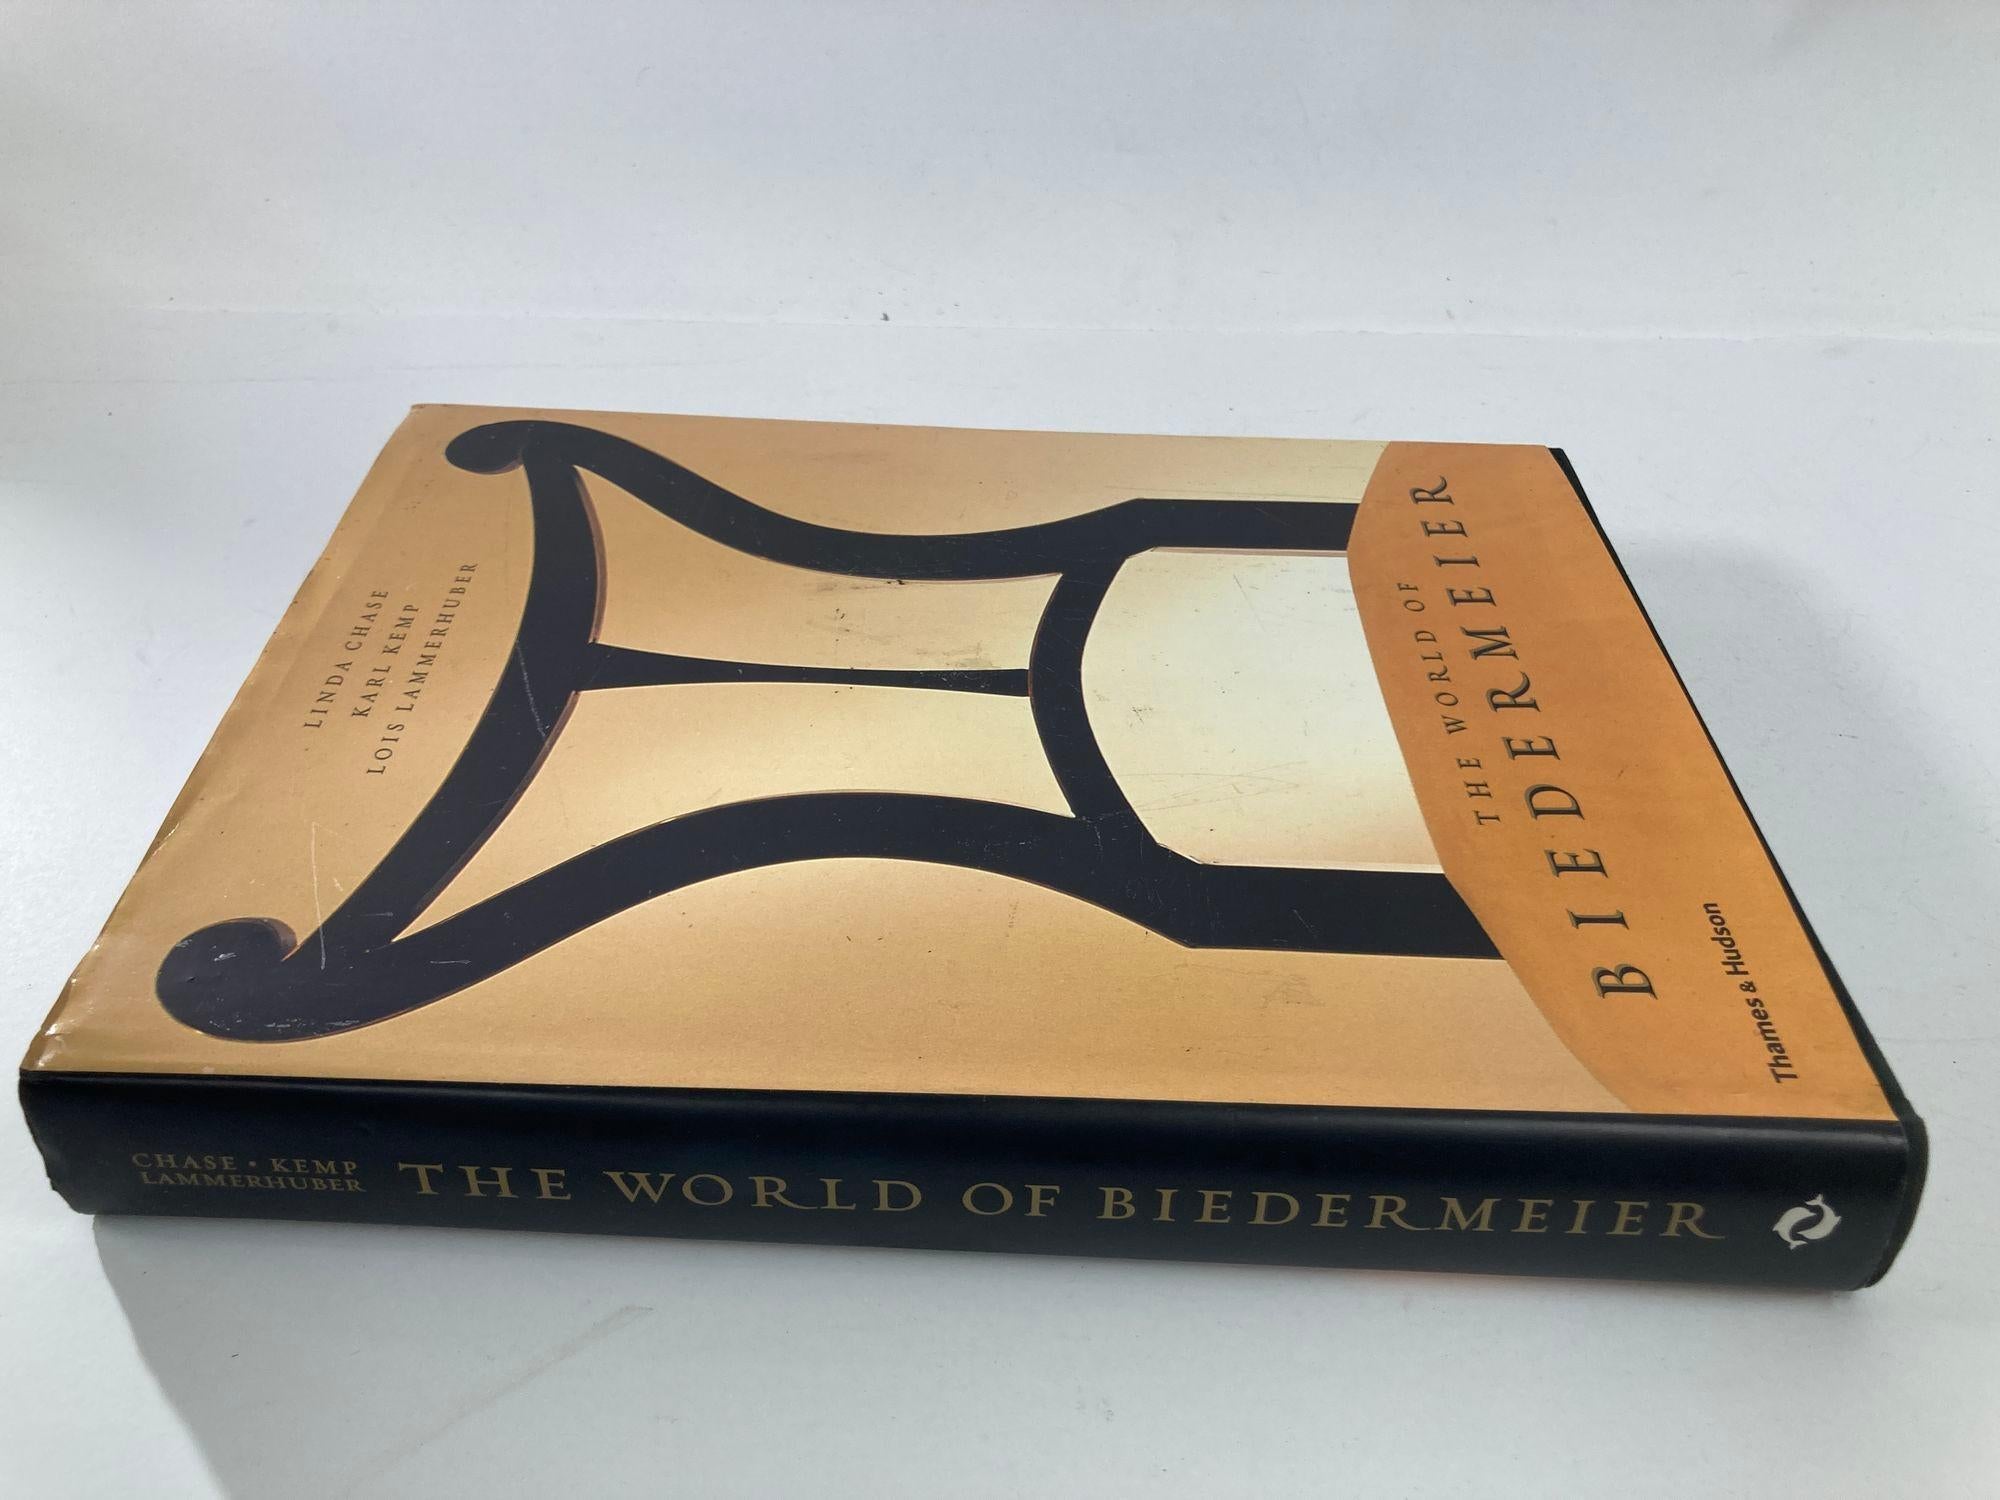 20th Century The World of Biedermeier by Linda Chase, Karl Kemp 2001 Hardcover Book